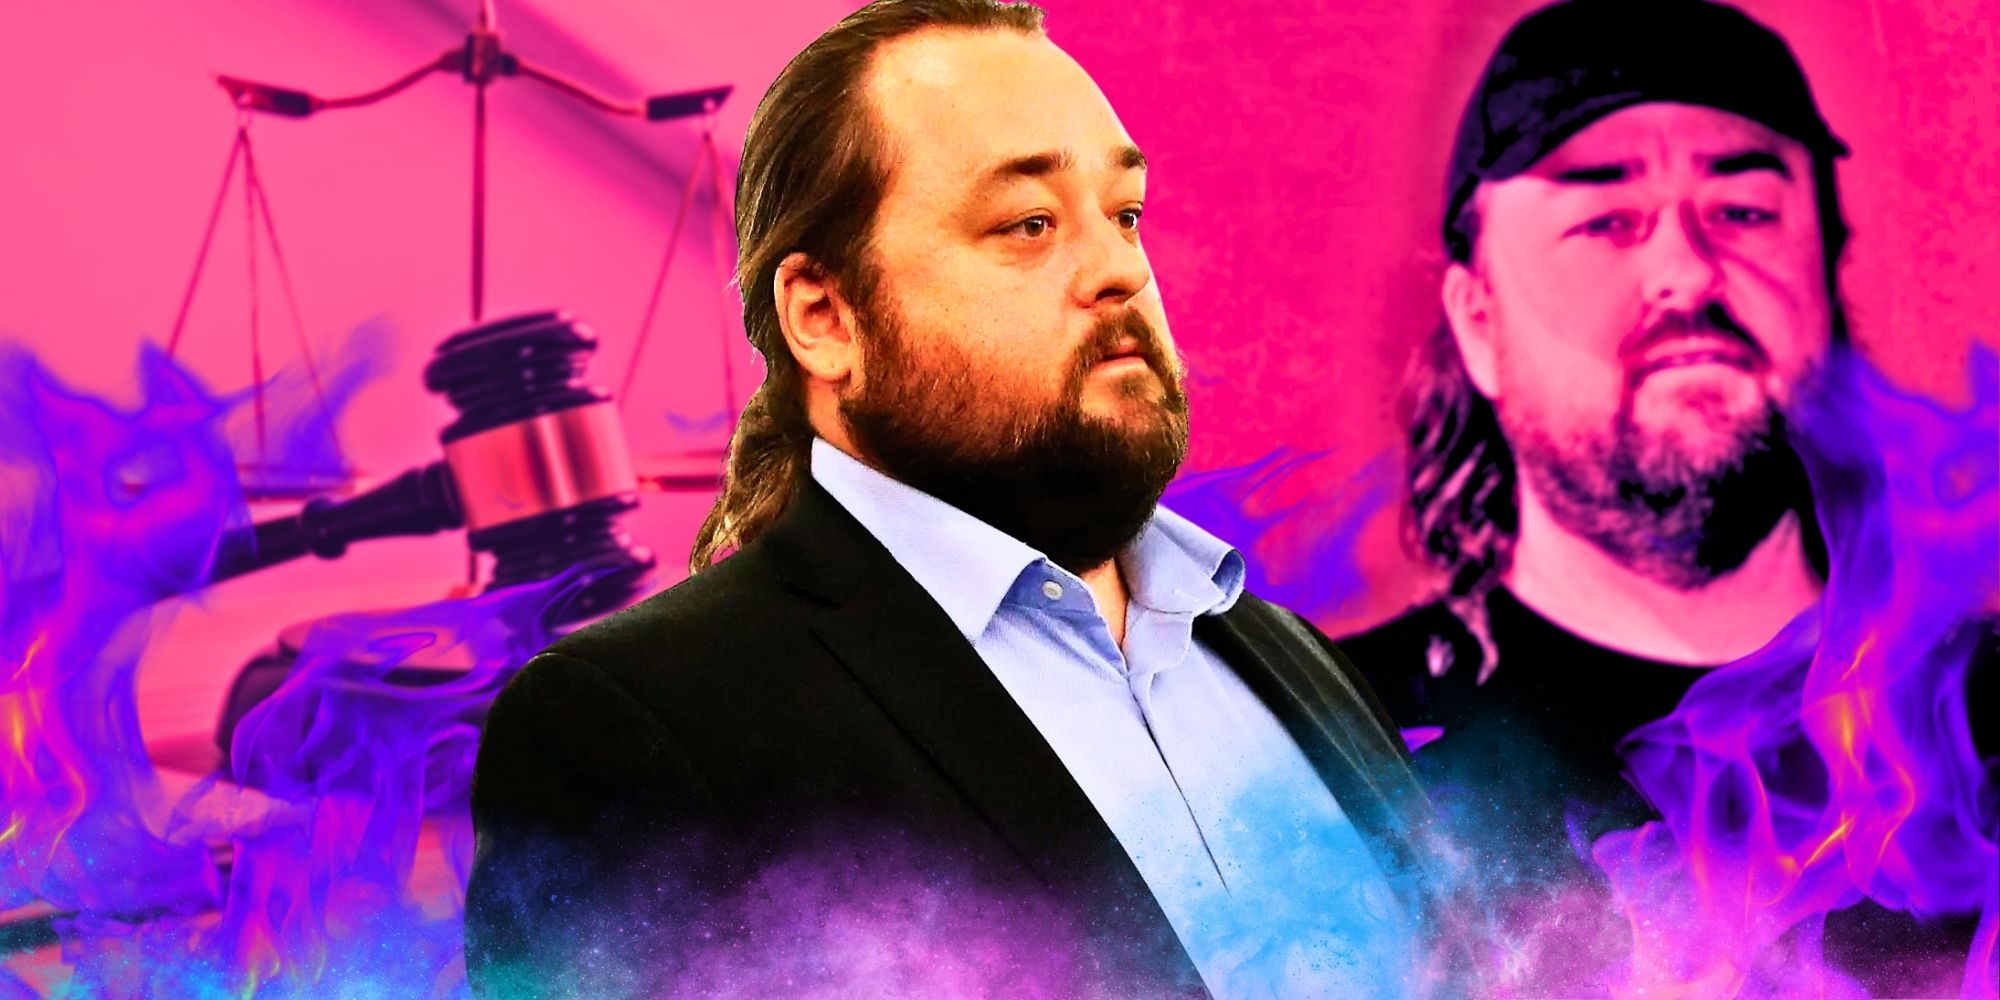 Pawn Stars' Austin Lee 'Chumlee' Russell